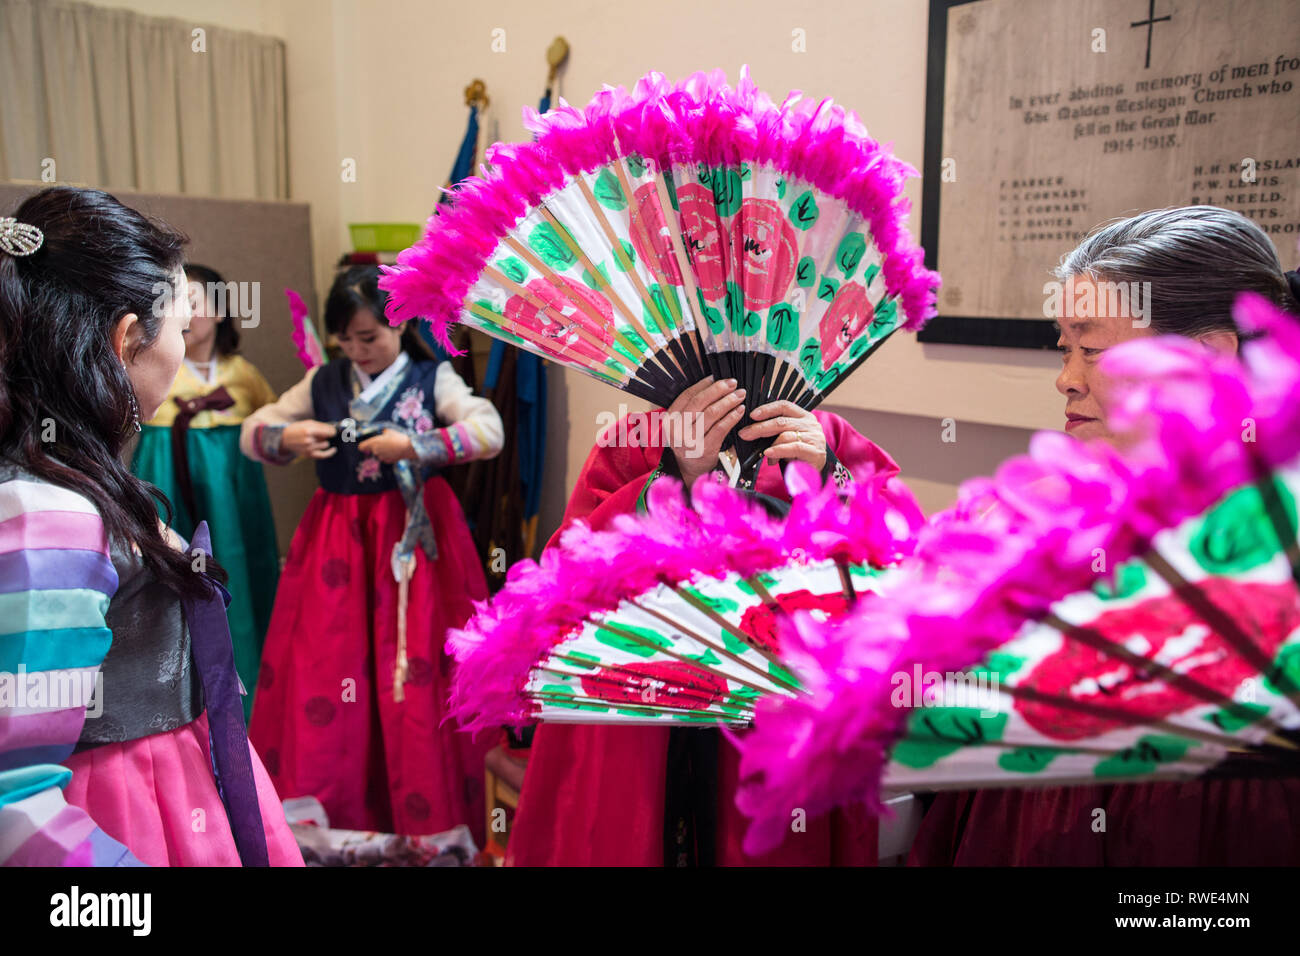 North and South Korean Ladies perform the Buchaechum also called a Fan Dance on the day Korea Commemorates 100th Anniversary of March 1st Independence. Stock Photo